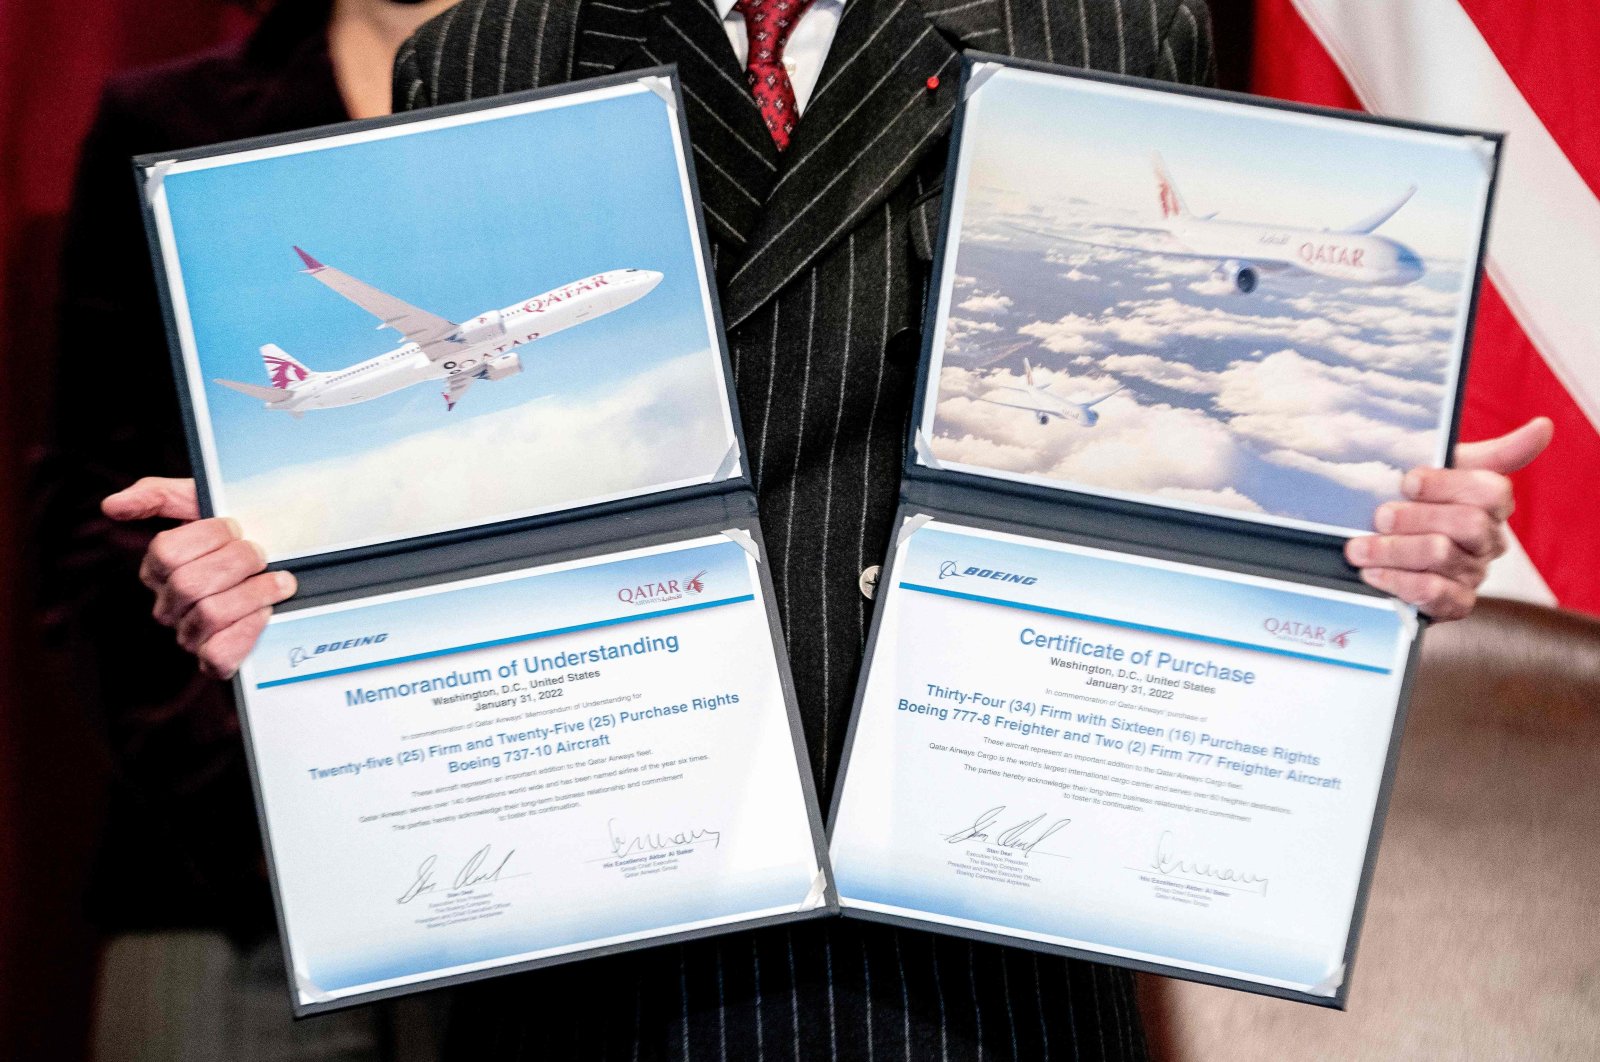 Akbar Al Baker, Group Chief Executive Officer of Qatar Airways, displays certificates following a signing ceremony in the Eisenhower Executive Office building in Washington, D.C., Jan. 31, 2022. (AFP Photo)